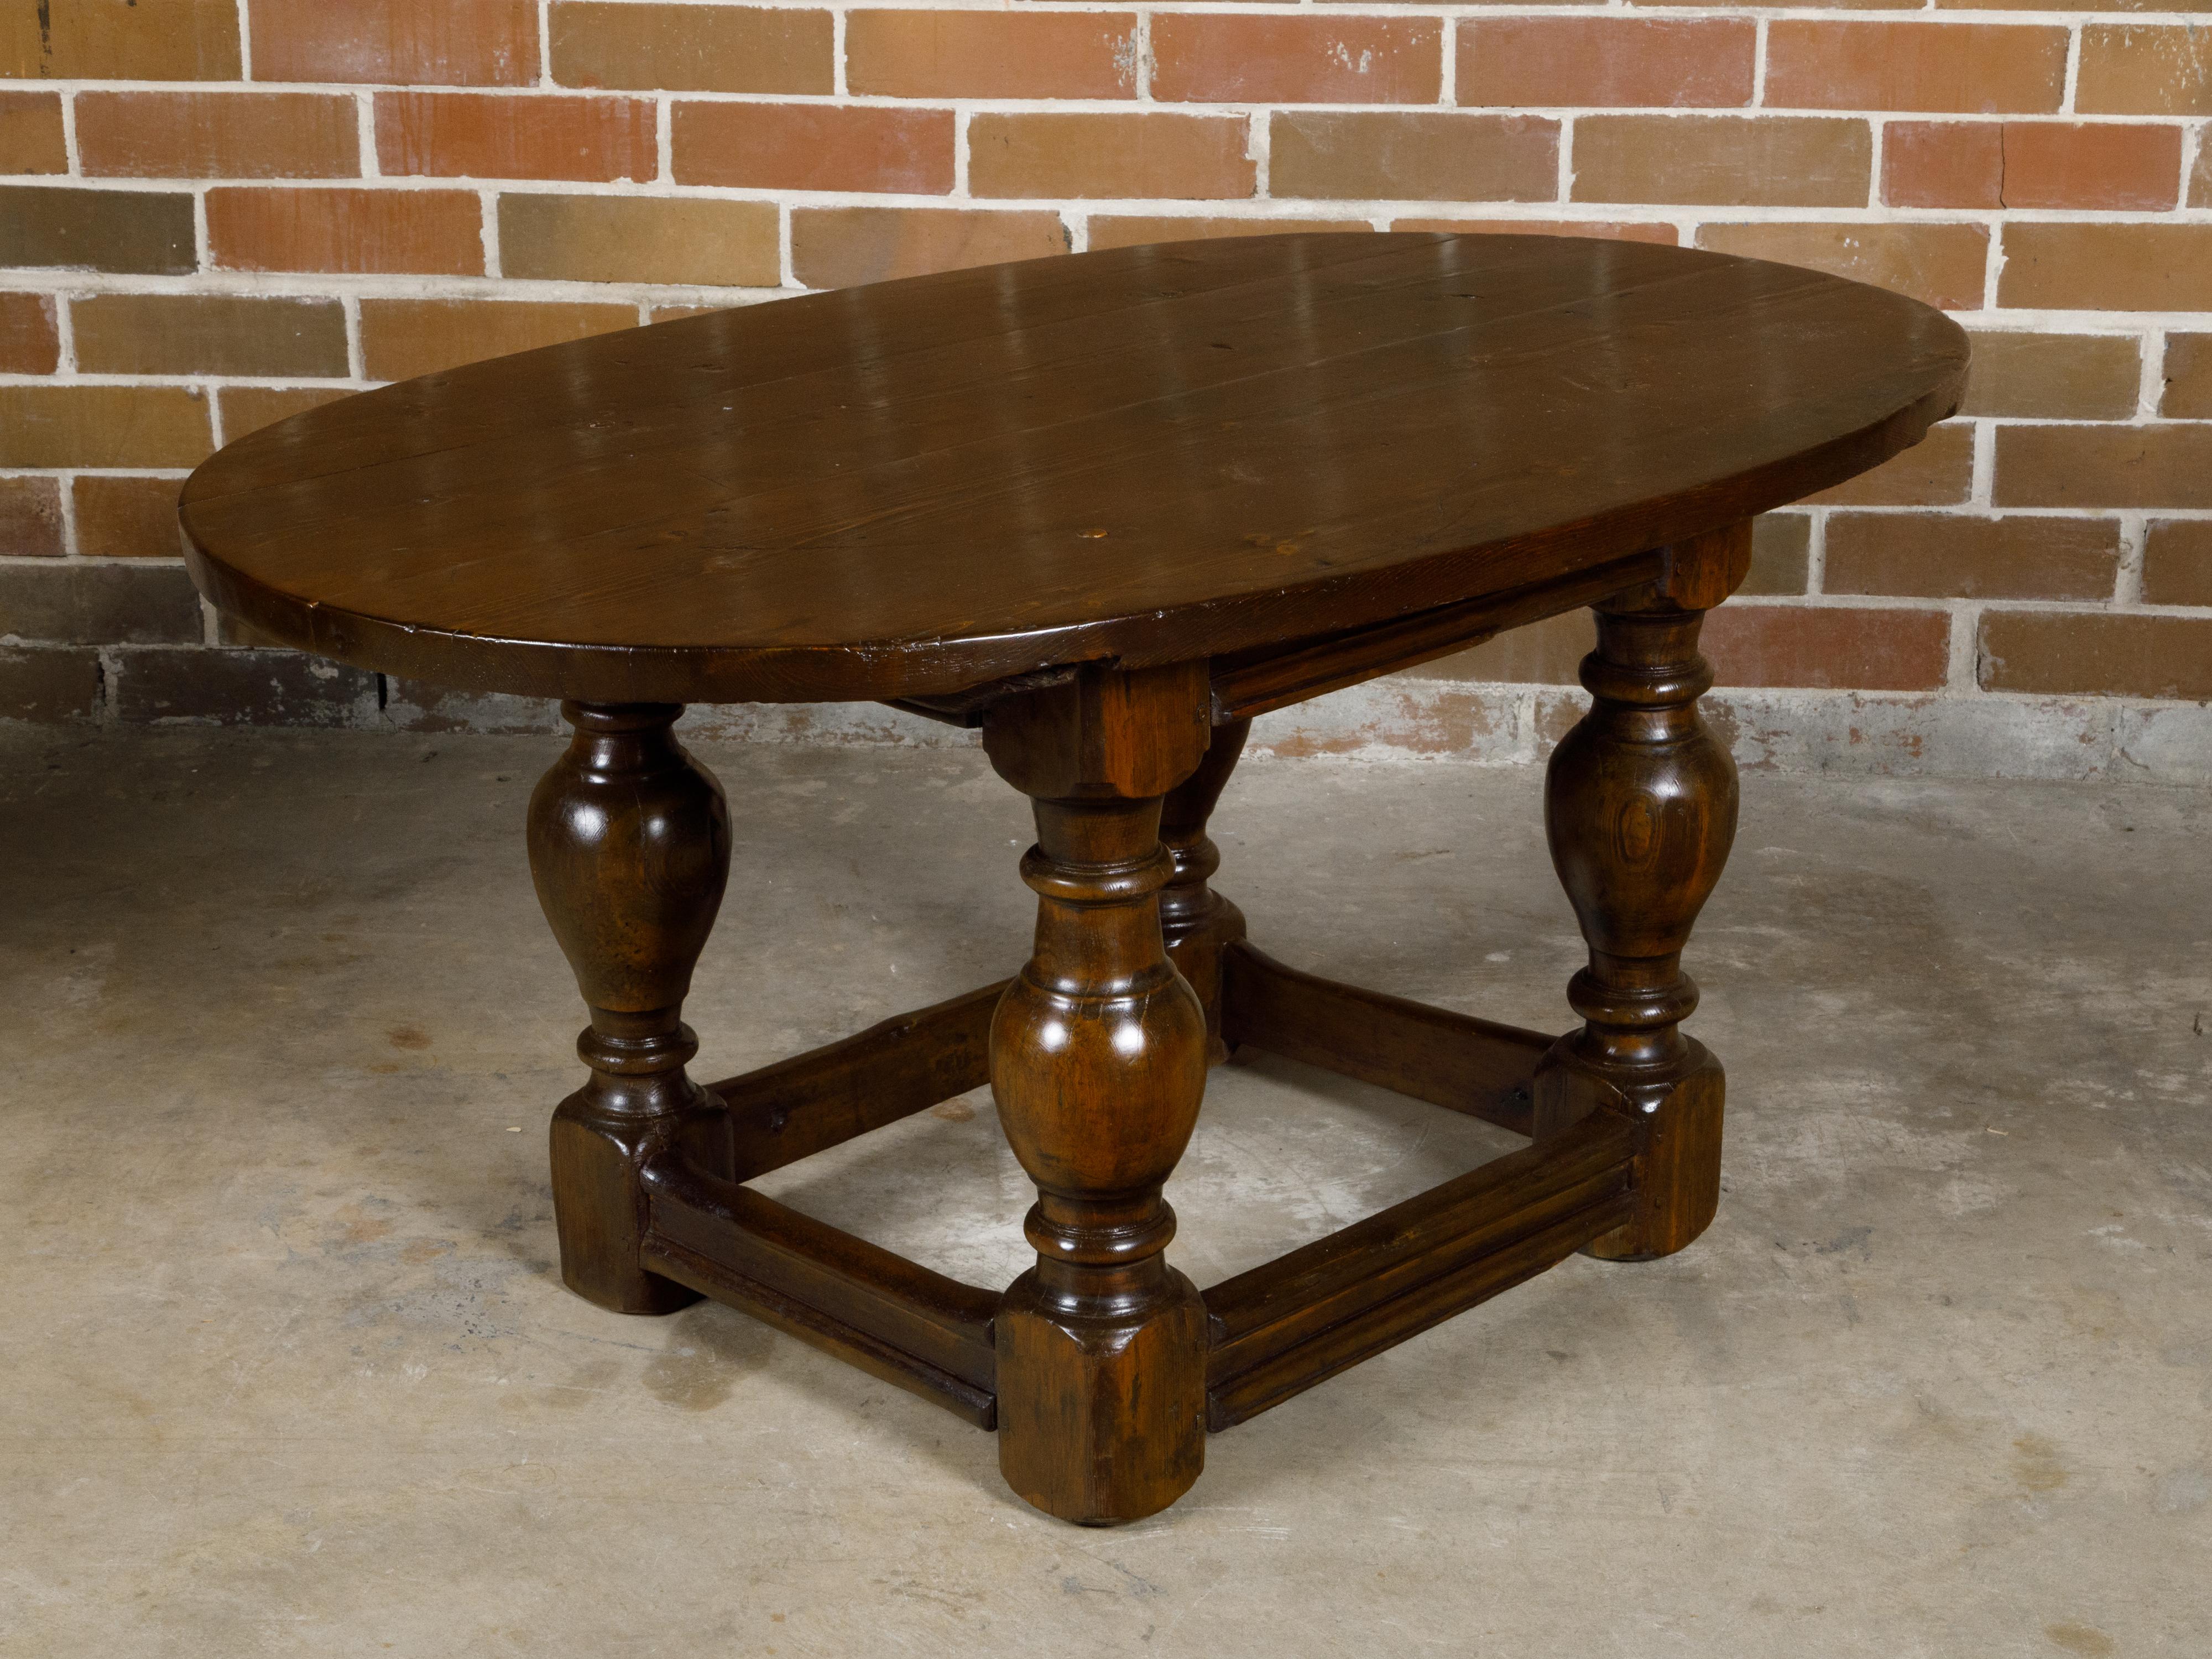 18th Century Georgian English Pine Table with Oval Top and Turned Legs For Sale 4